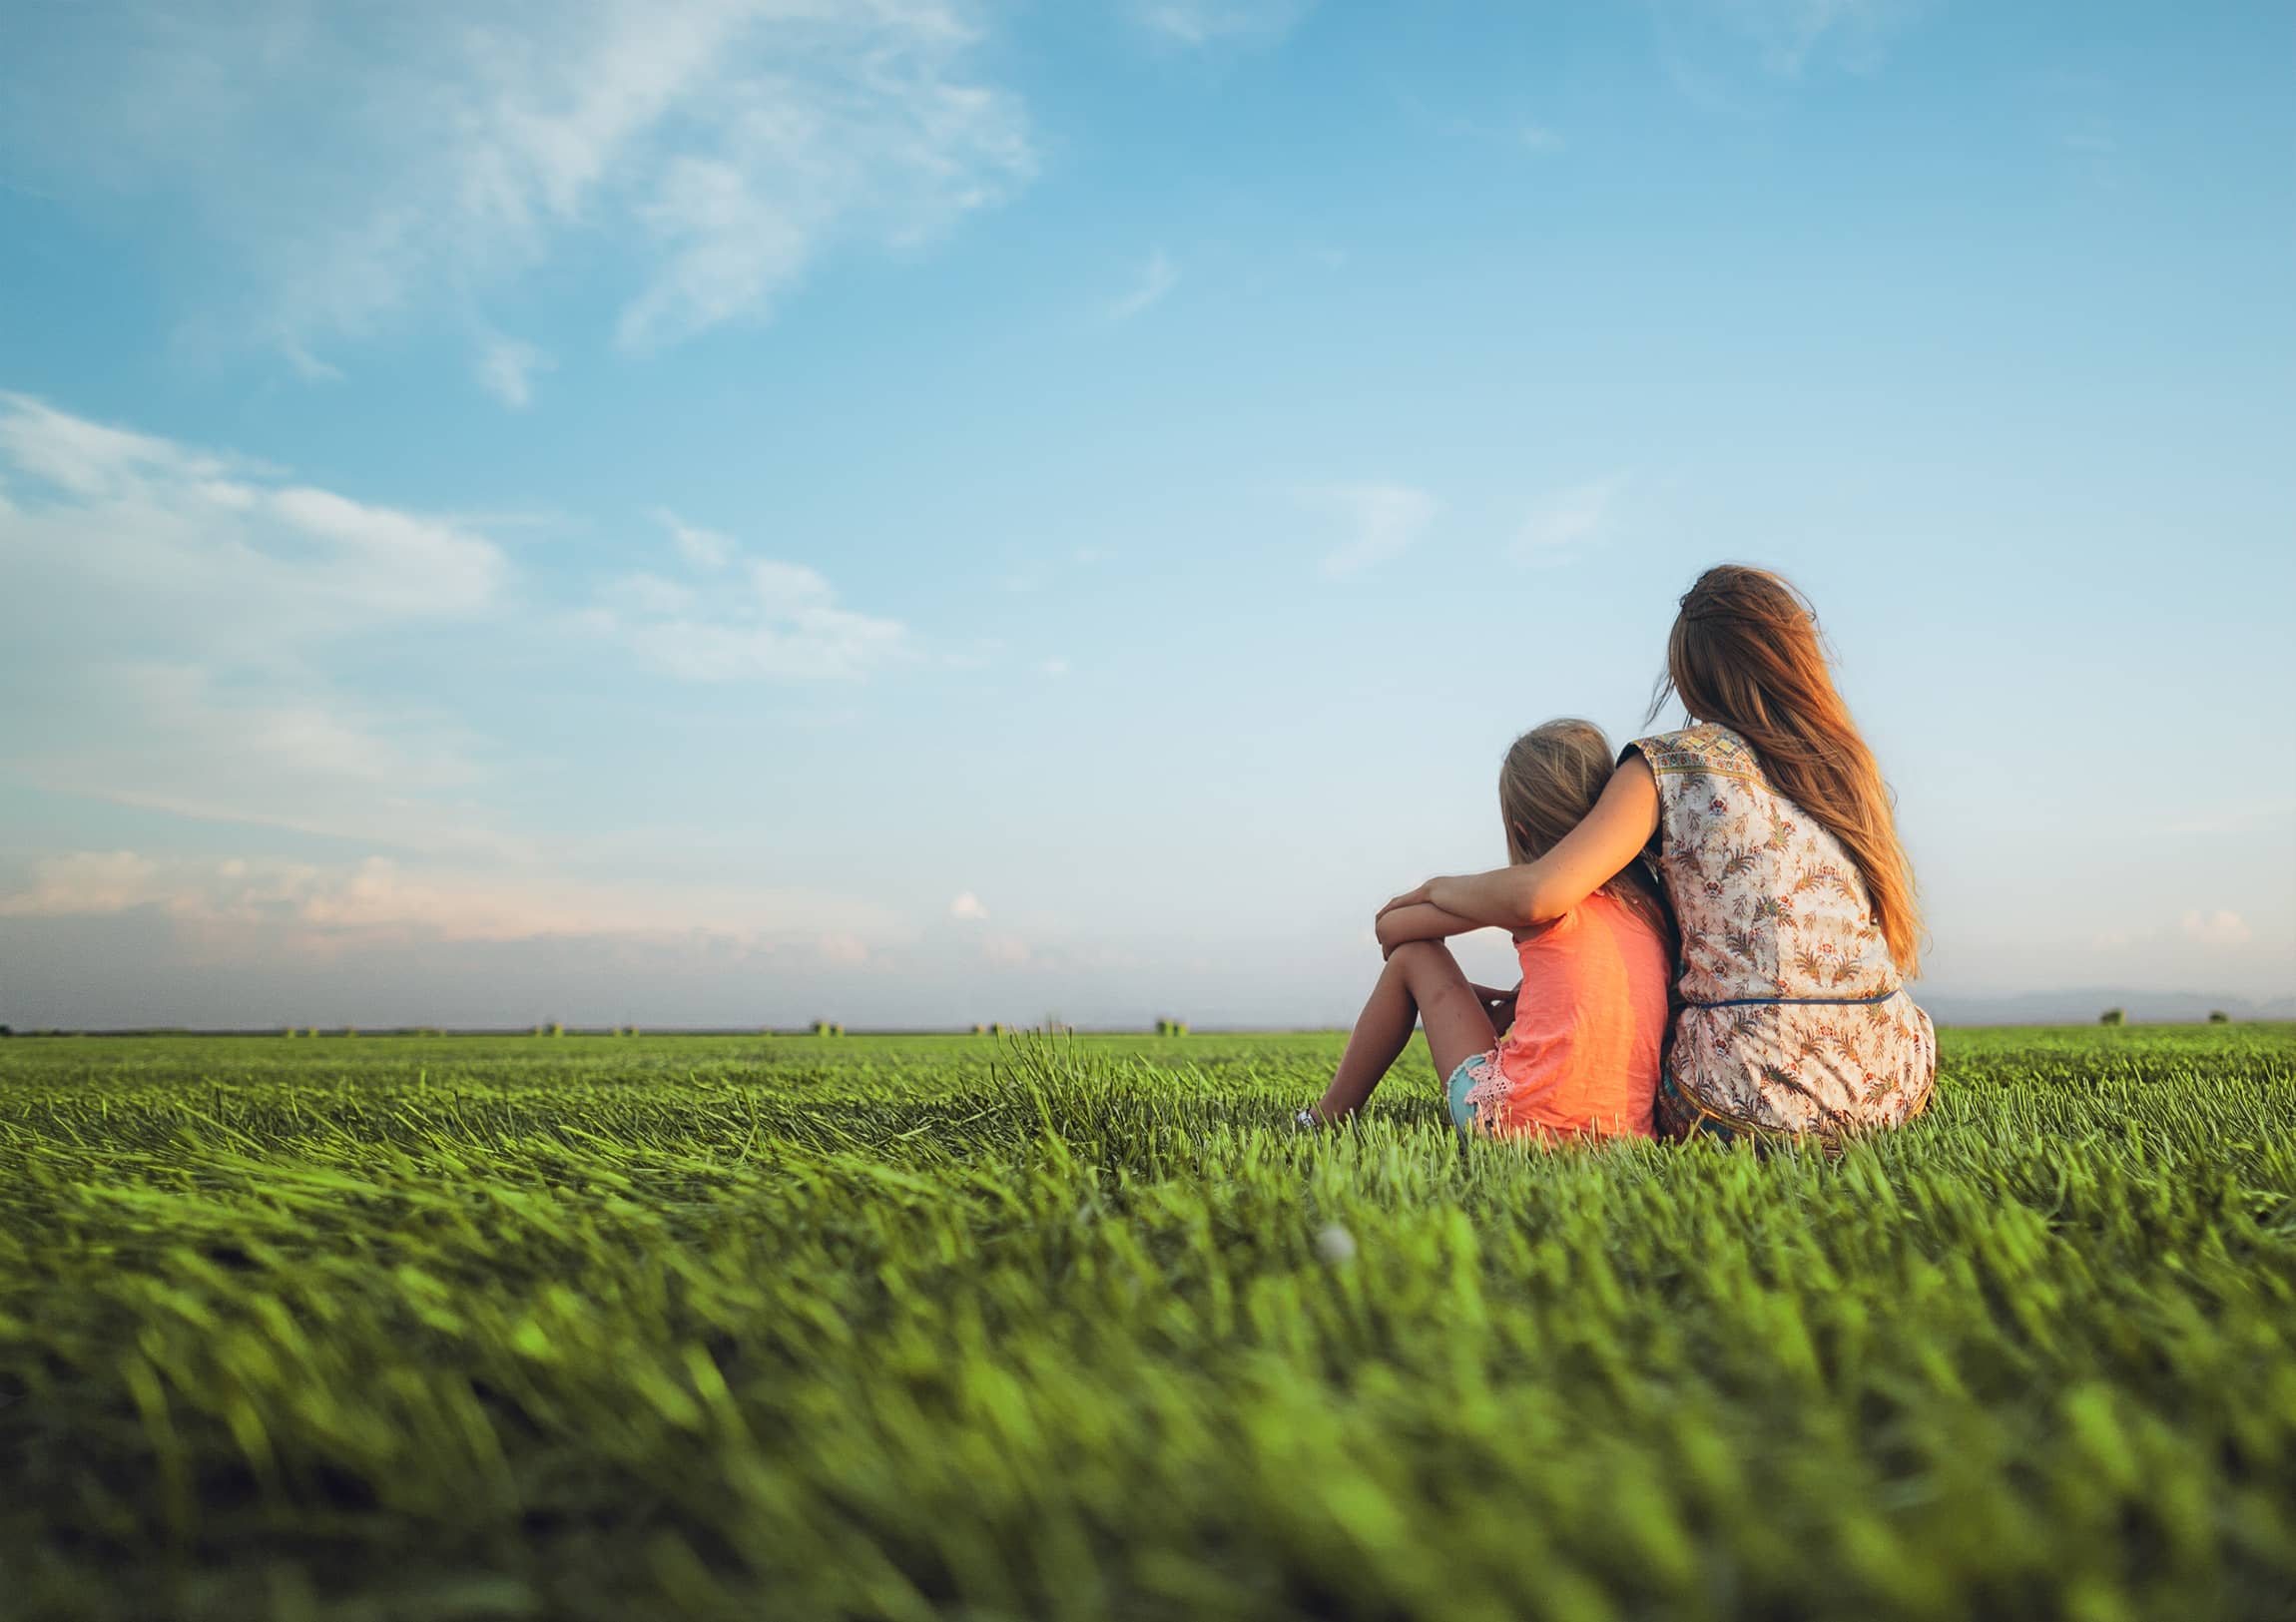 A woman sits in lush grass with her child as they look out at the blue sky and fluffy clouds on the horizon